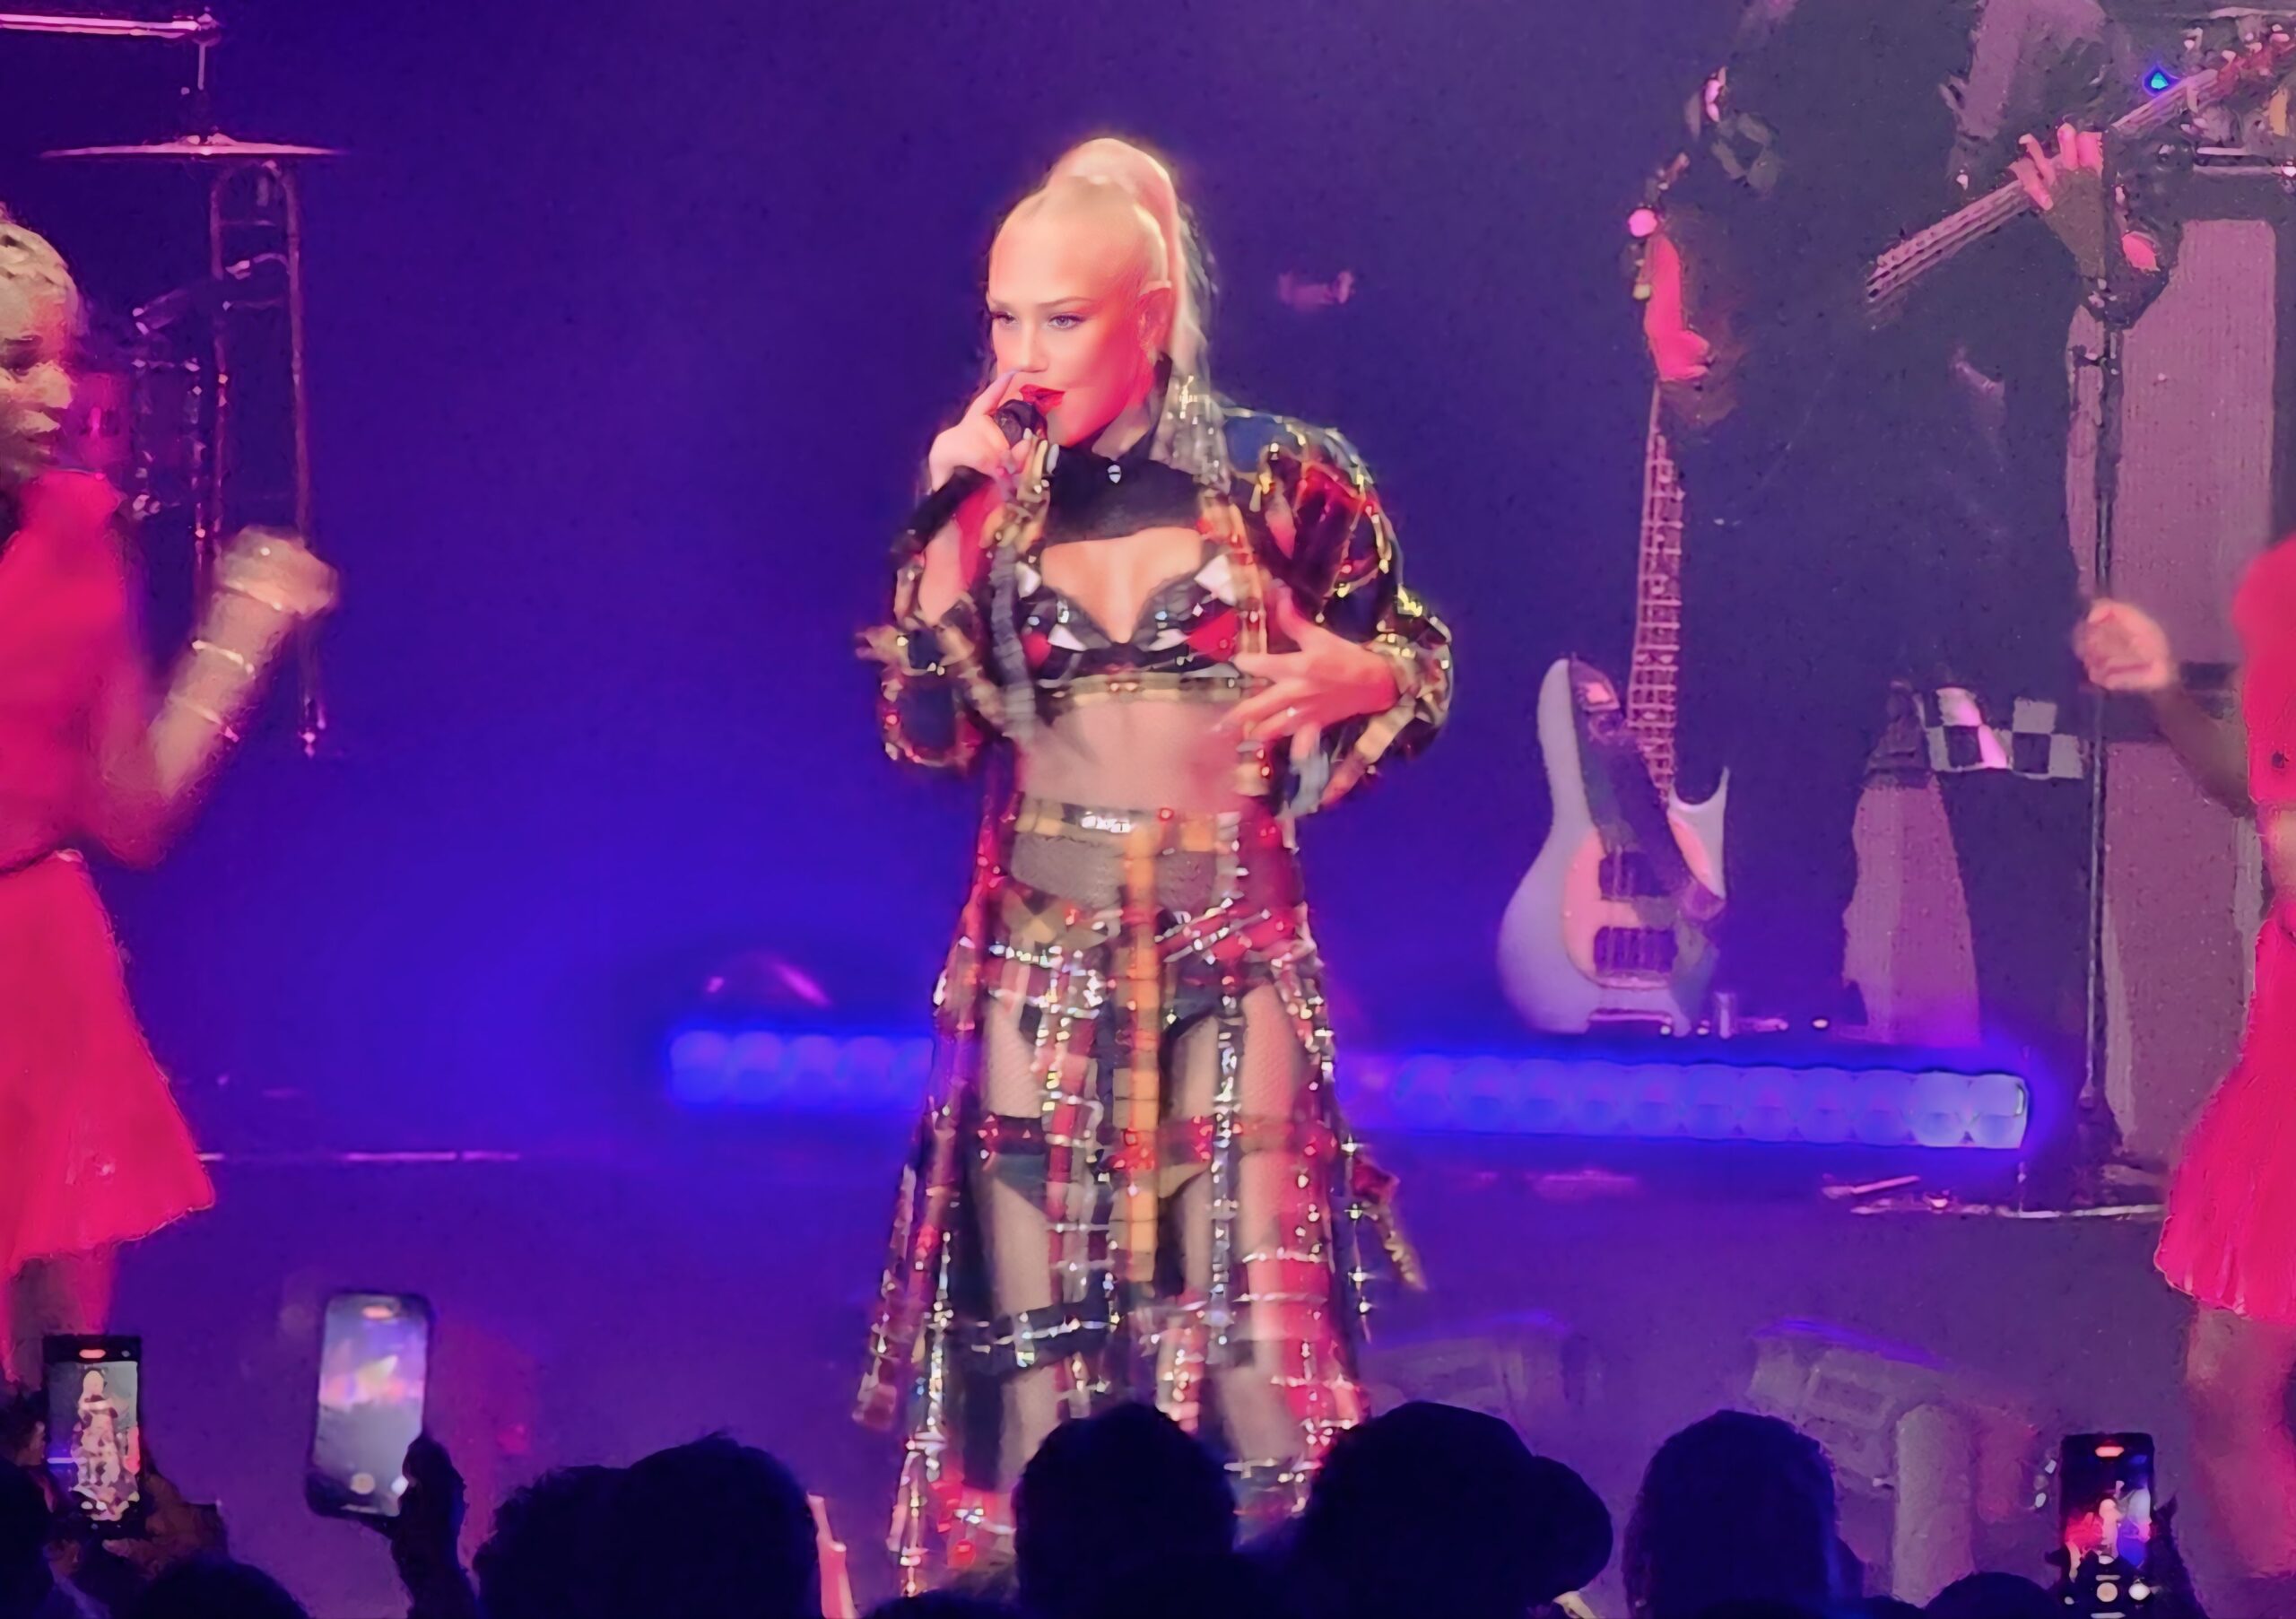 #SPOTTED: GWEN STEFANI LIVE AT GREAT CANADIAN CASINO RESORT TORONTO